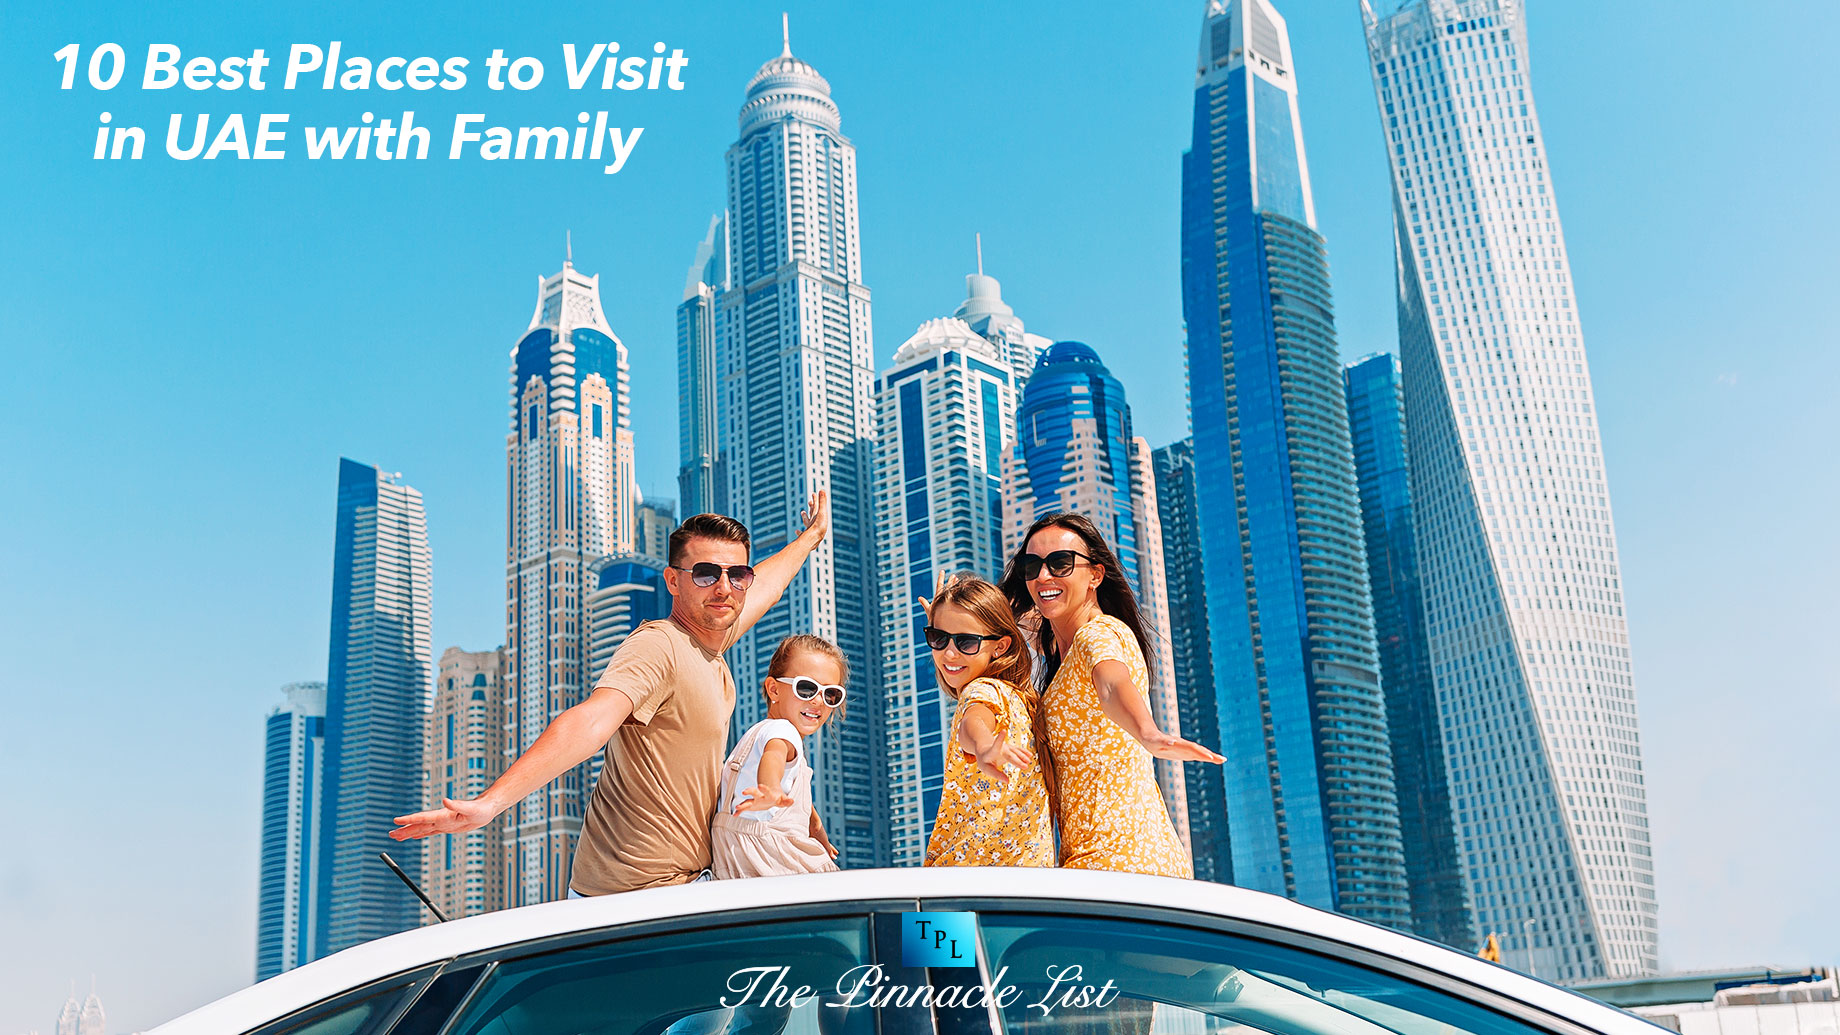 10 Best Places to Visit in UAE with Family